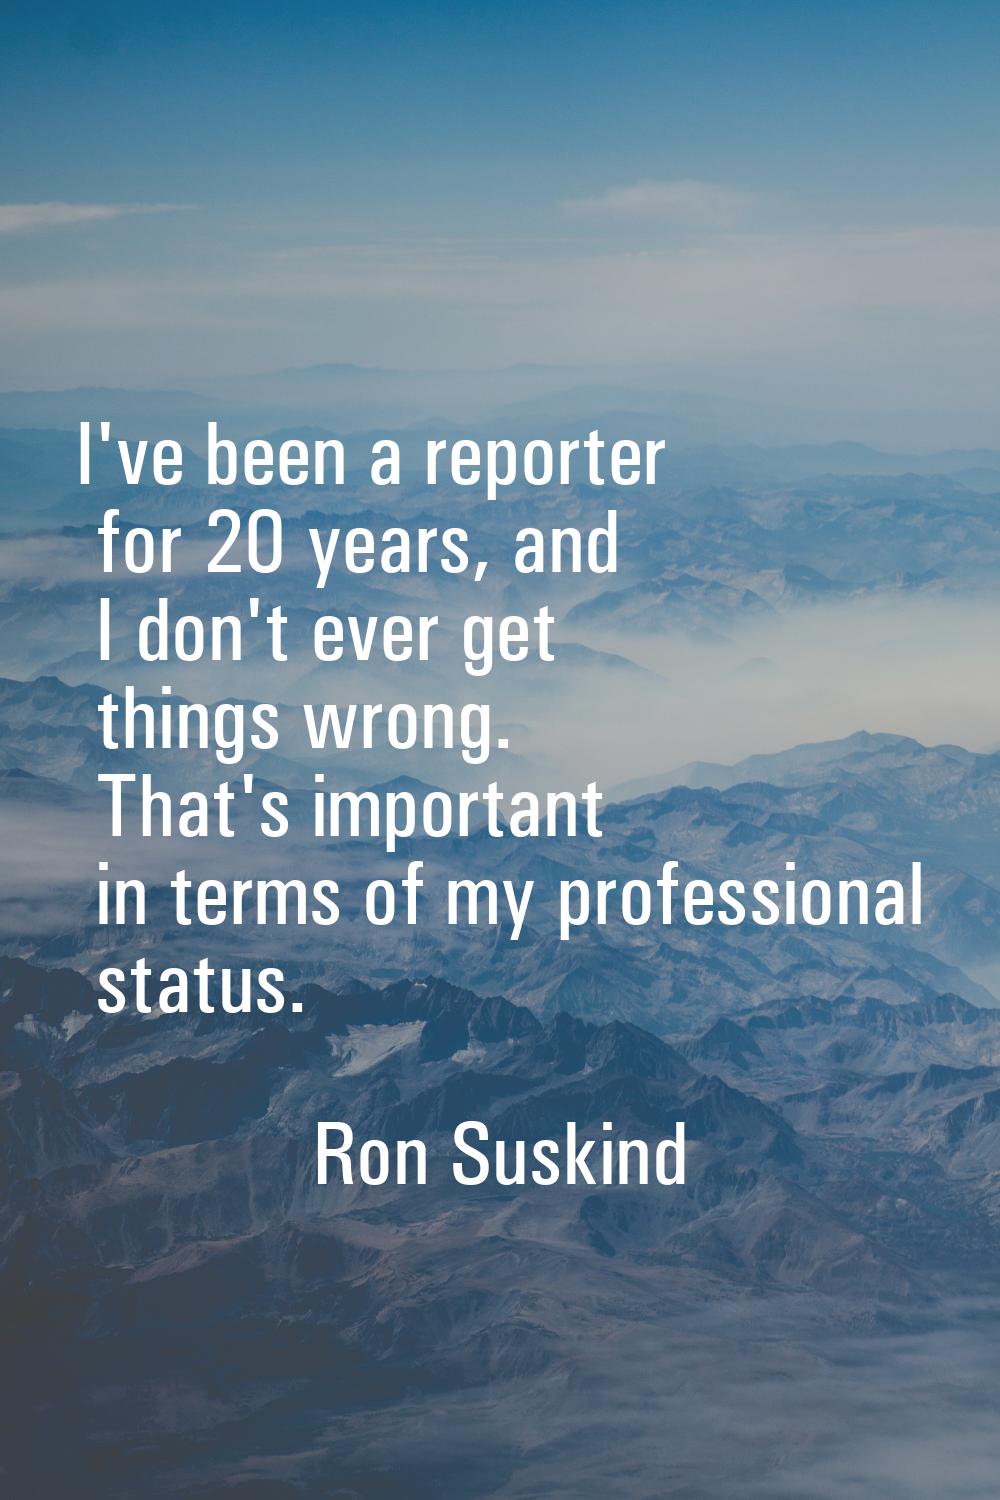 I've been a reporter for 20 years, and I don't ever get things wrong. That's important in terms of 